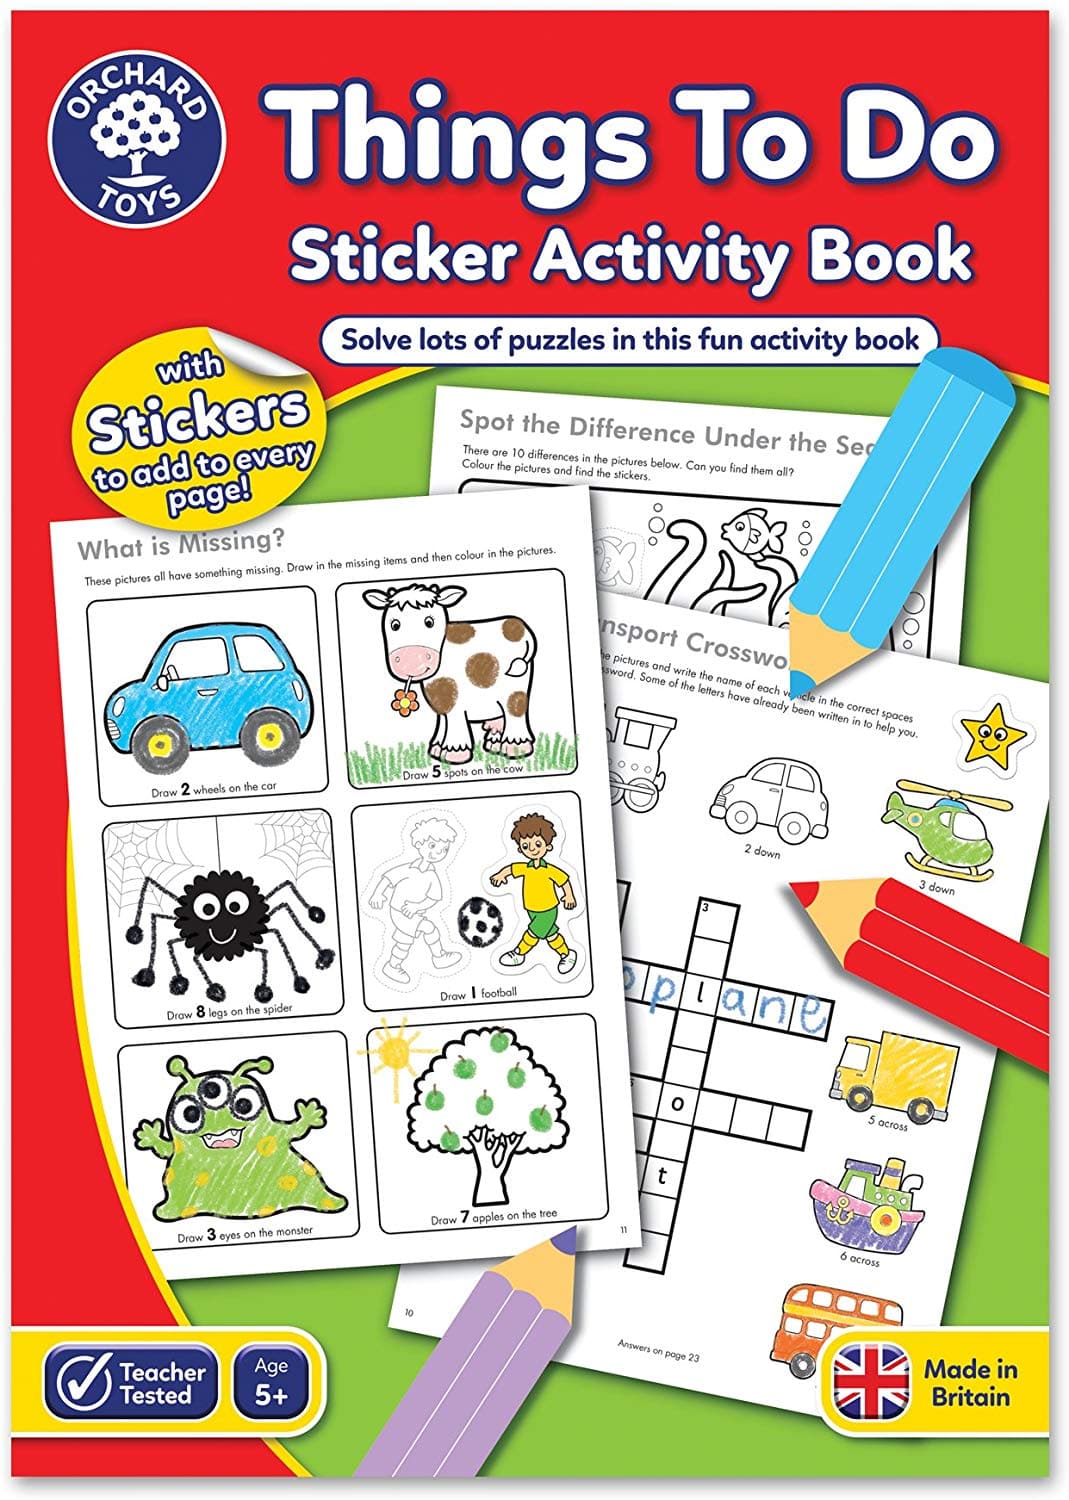 Things To Do Activity Book